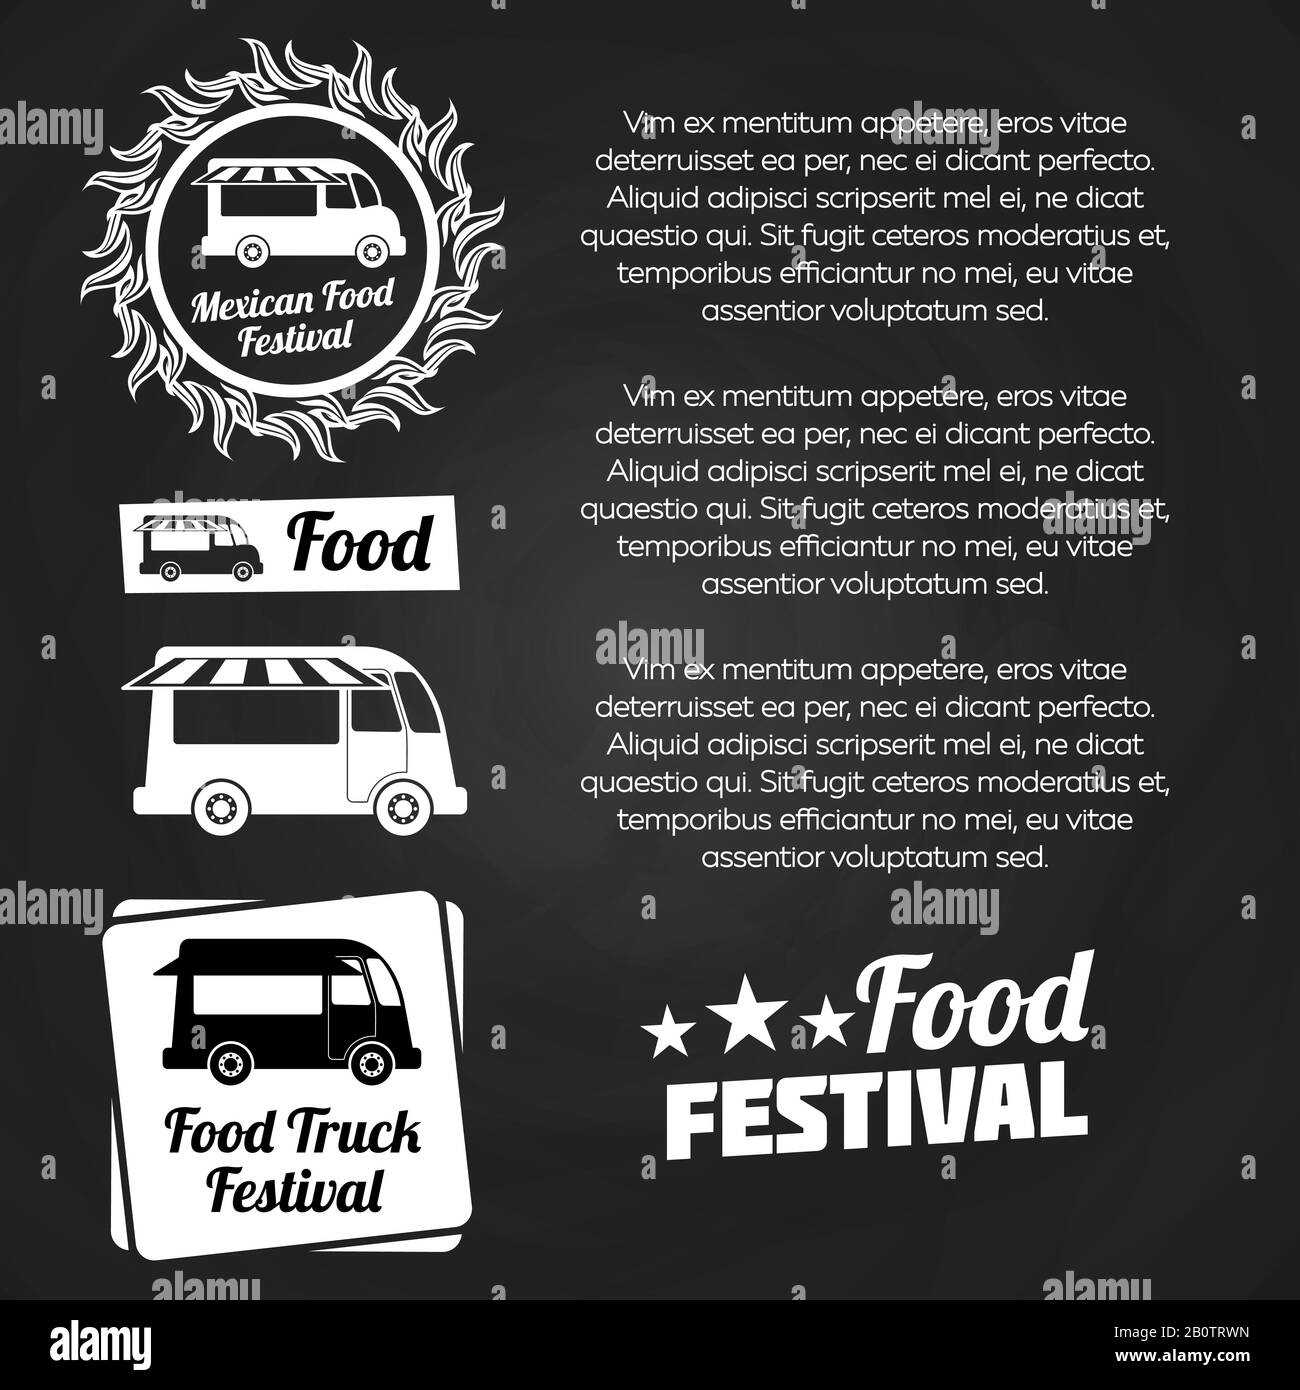 Chalkboard food festival poster design with food labels and food trucks. Vector illustration Stock Vector